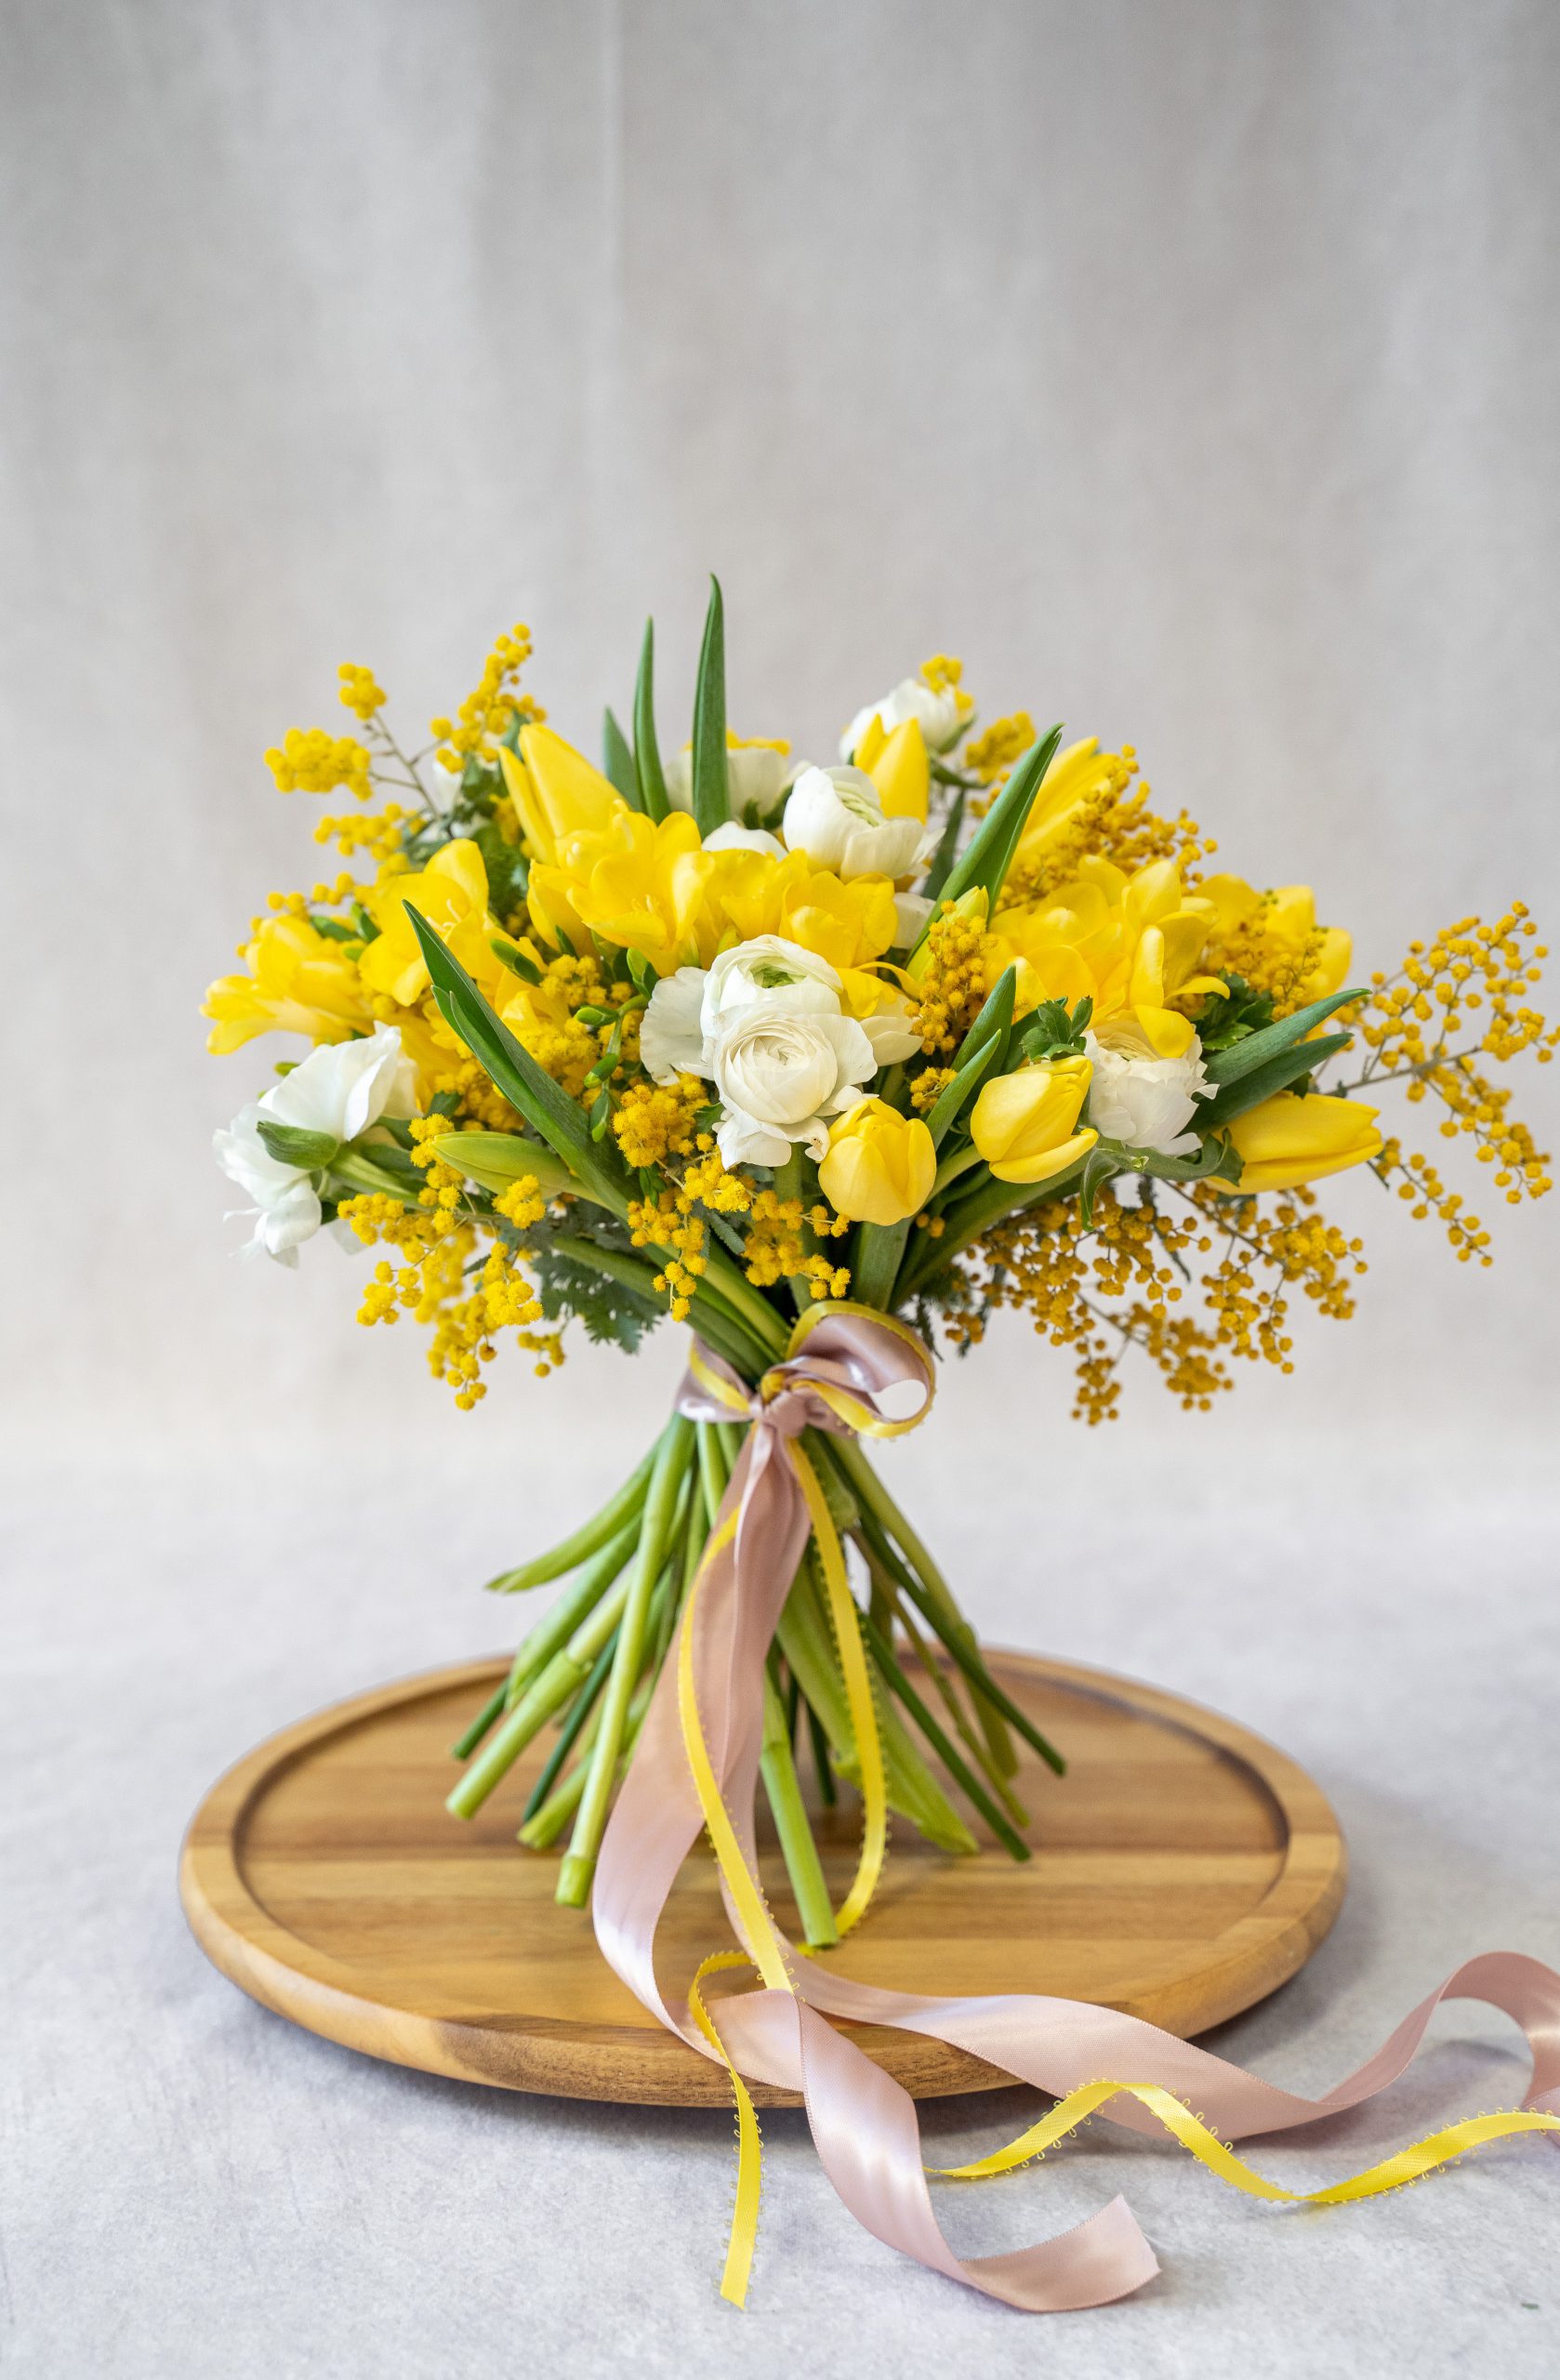 What flowers do you buy for Easter?